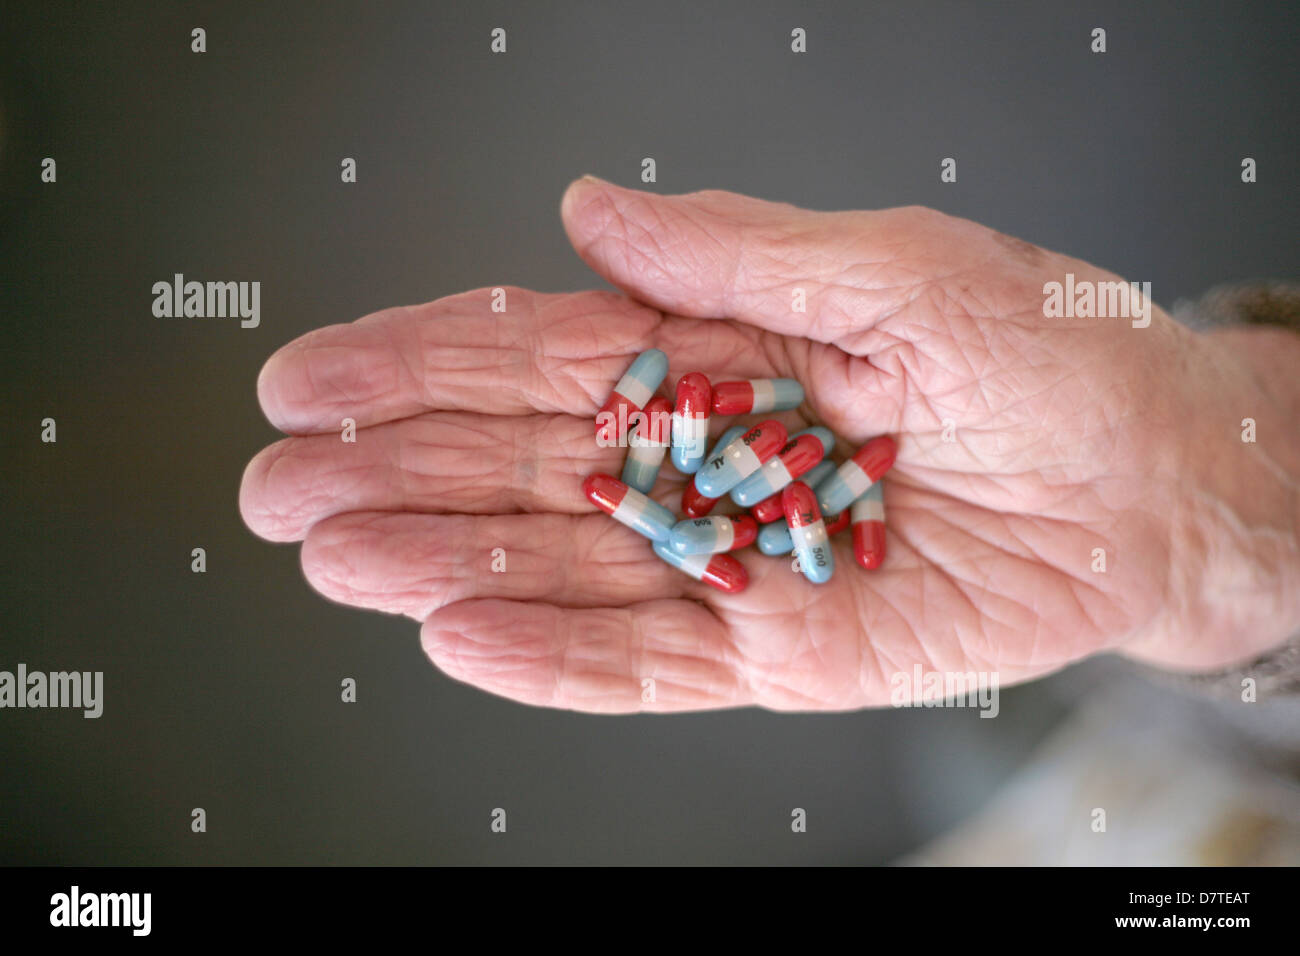 Antibiotic is a drug used to treat infections caused by bacteria and other microorganisms. Stock Photo